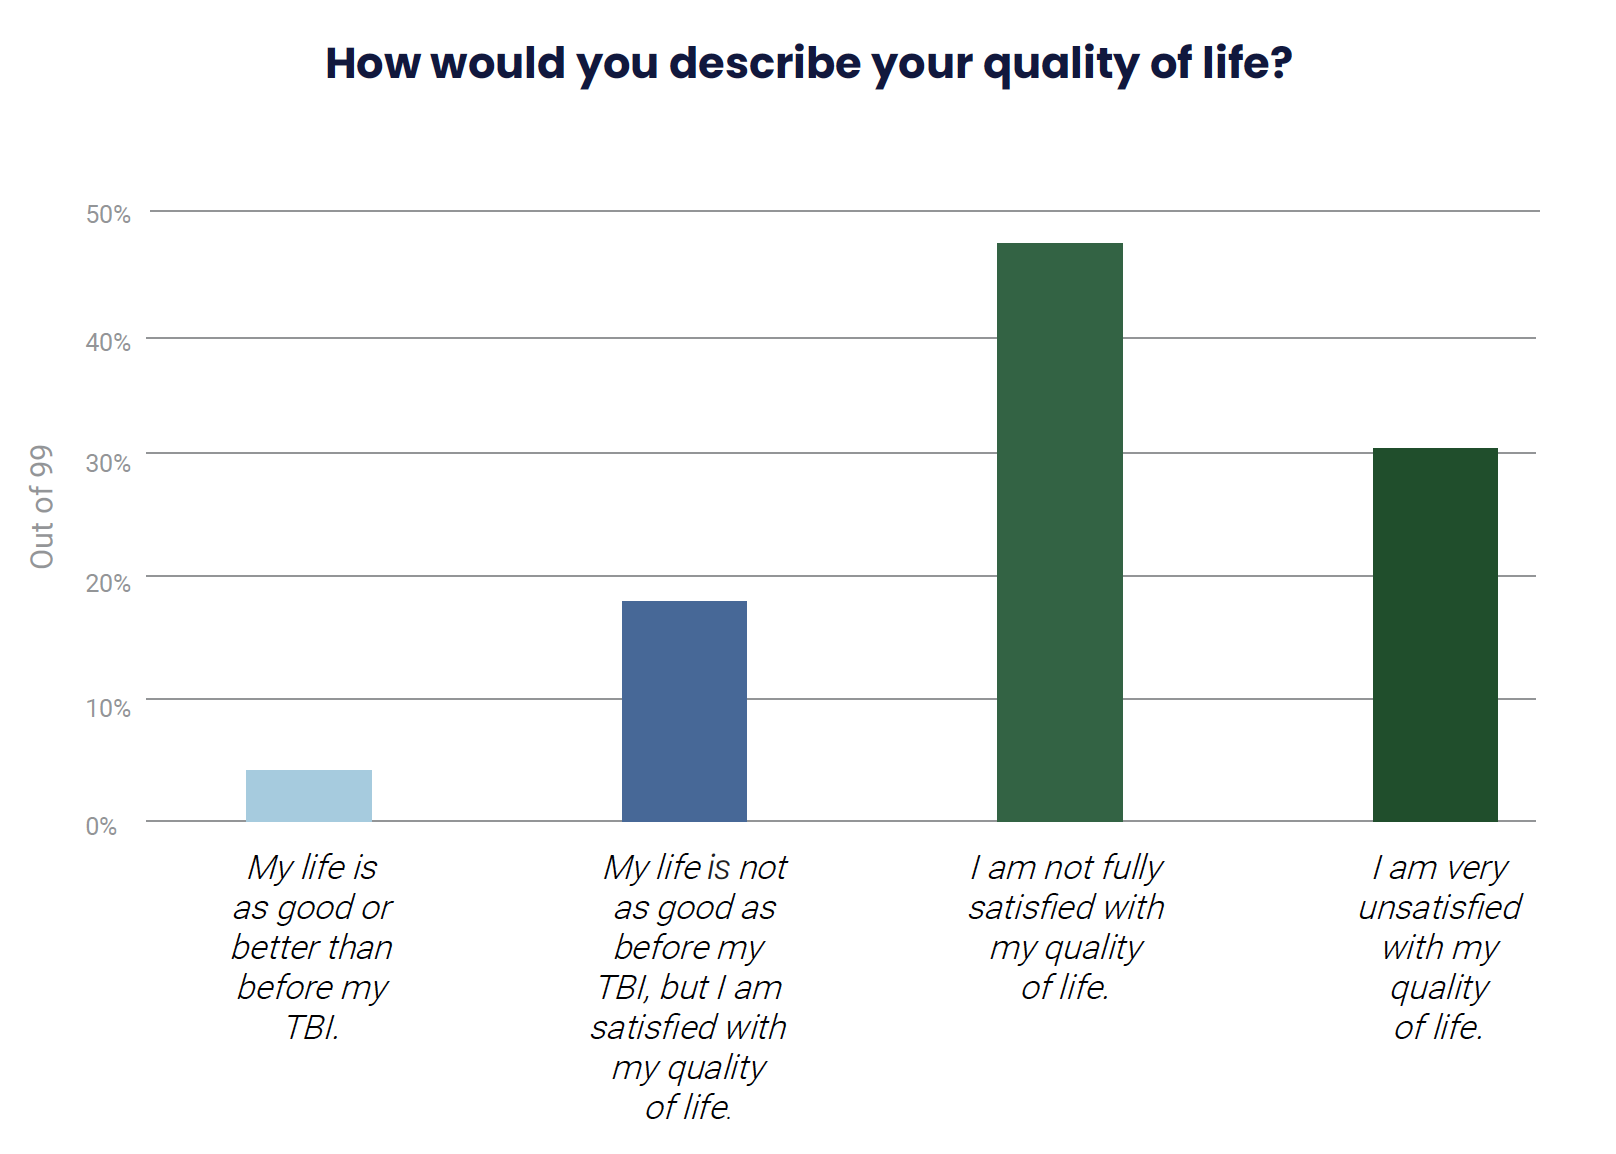 Visualization of data to question: "How would you describe your quality of life?" provided in the table above